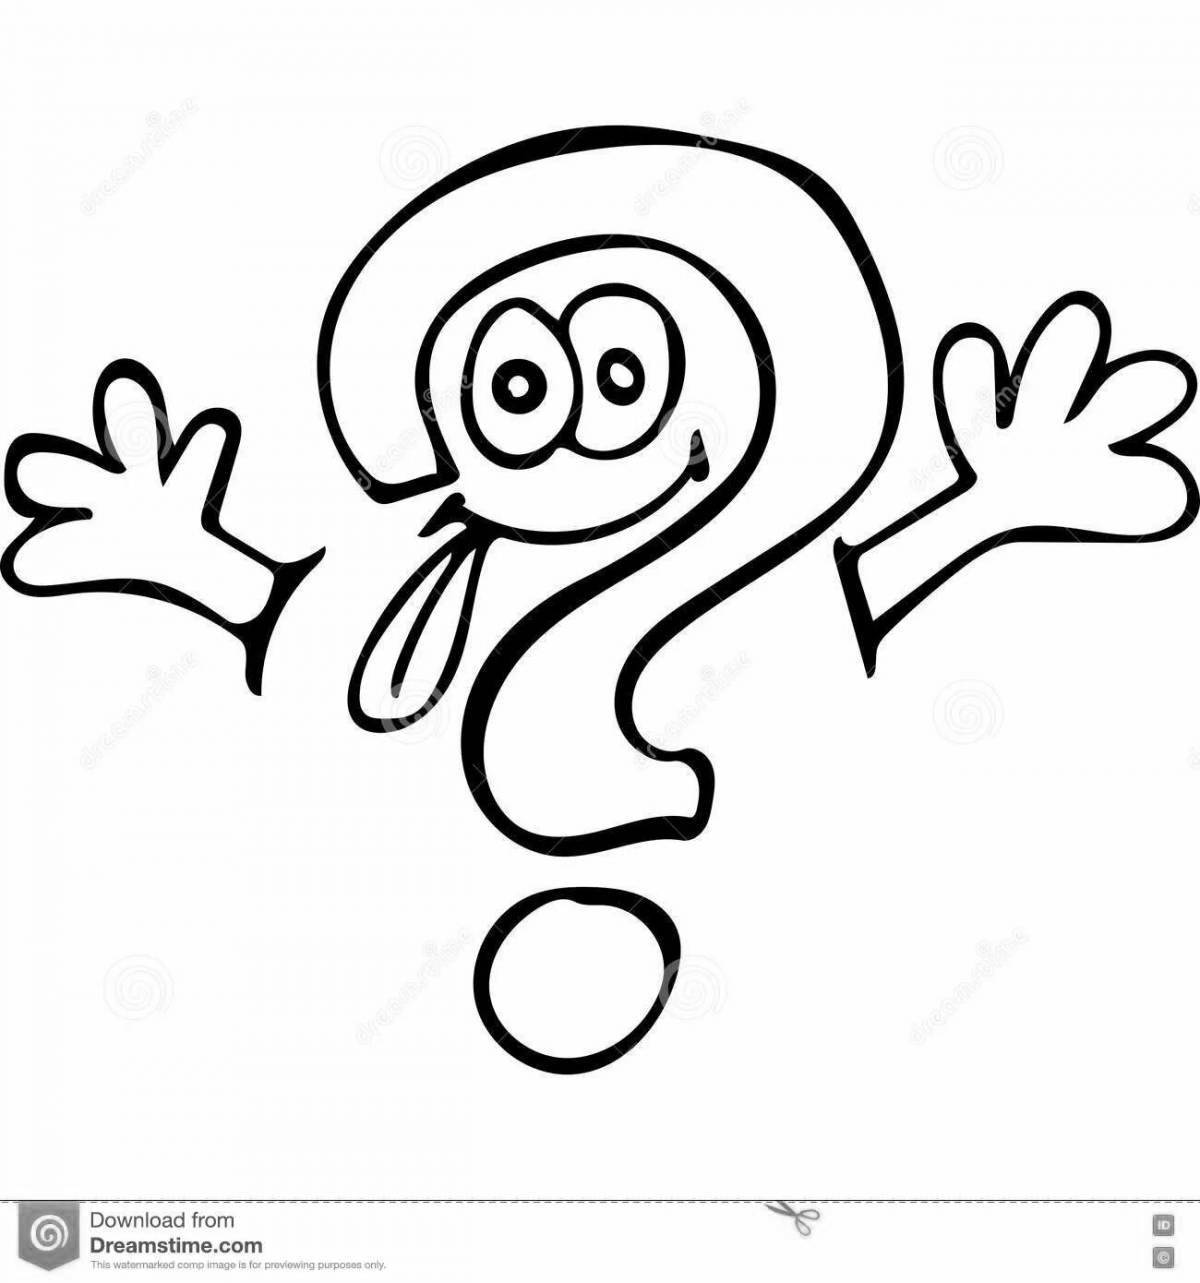 Charming question mark coloring page